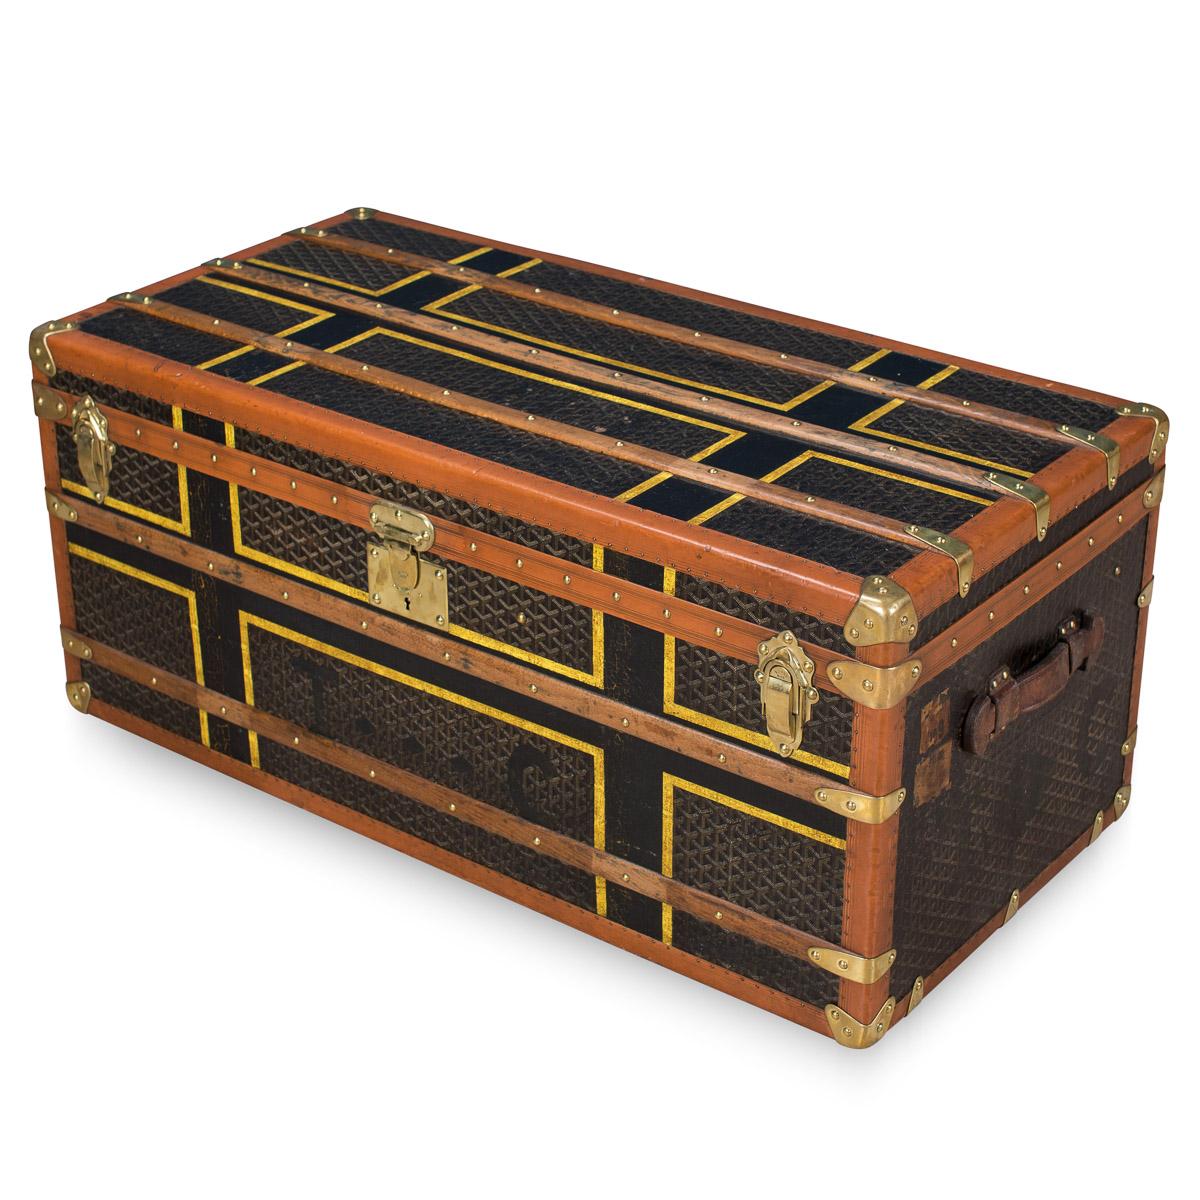 A larger than average antique Goyard trunk dating to the early part of the 20th century. Over recent years the brand has been relaunched and has taken the world of fashion by storm. The original E. Goyard firm was a trunk maker which rivalled LV and